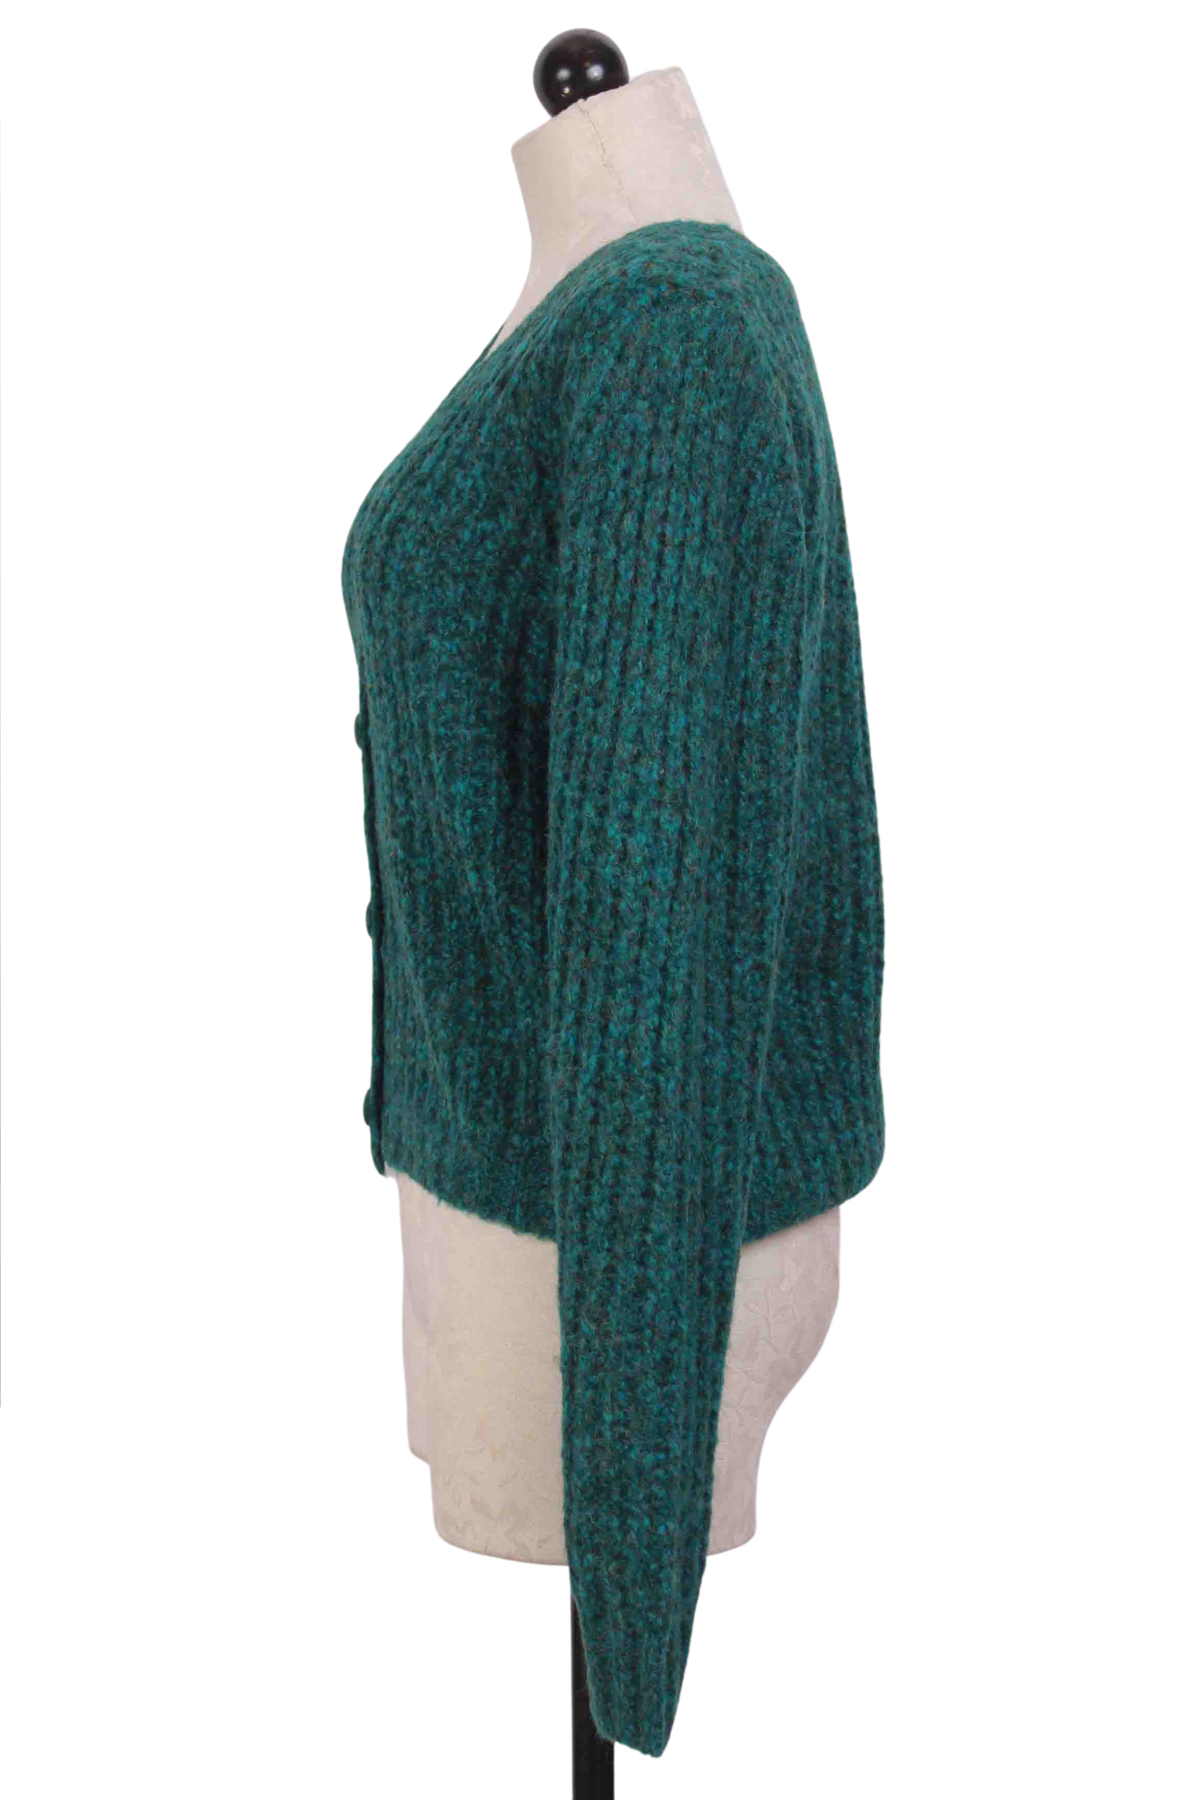 side view of Green V Neck Cable Knit Cardigan by Compania Fantastica